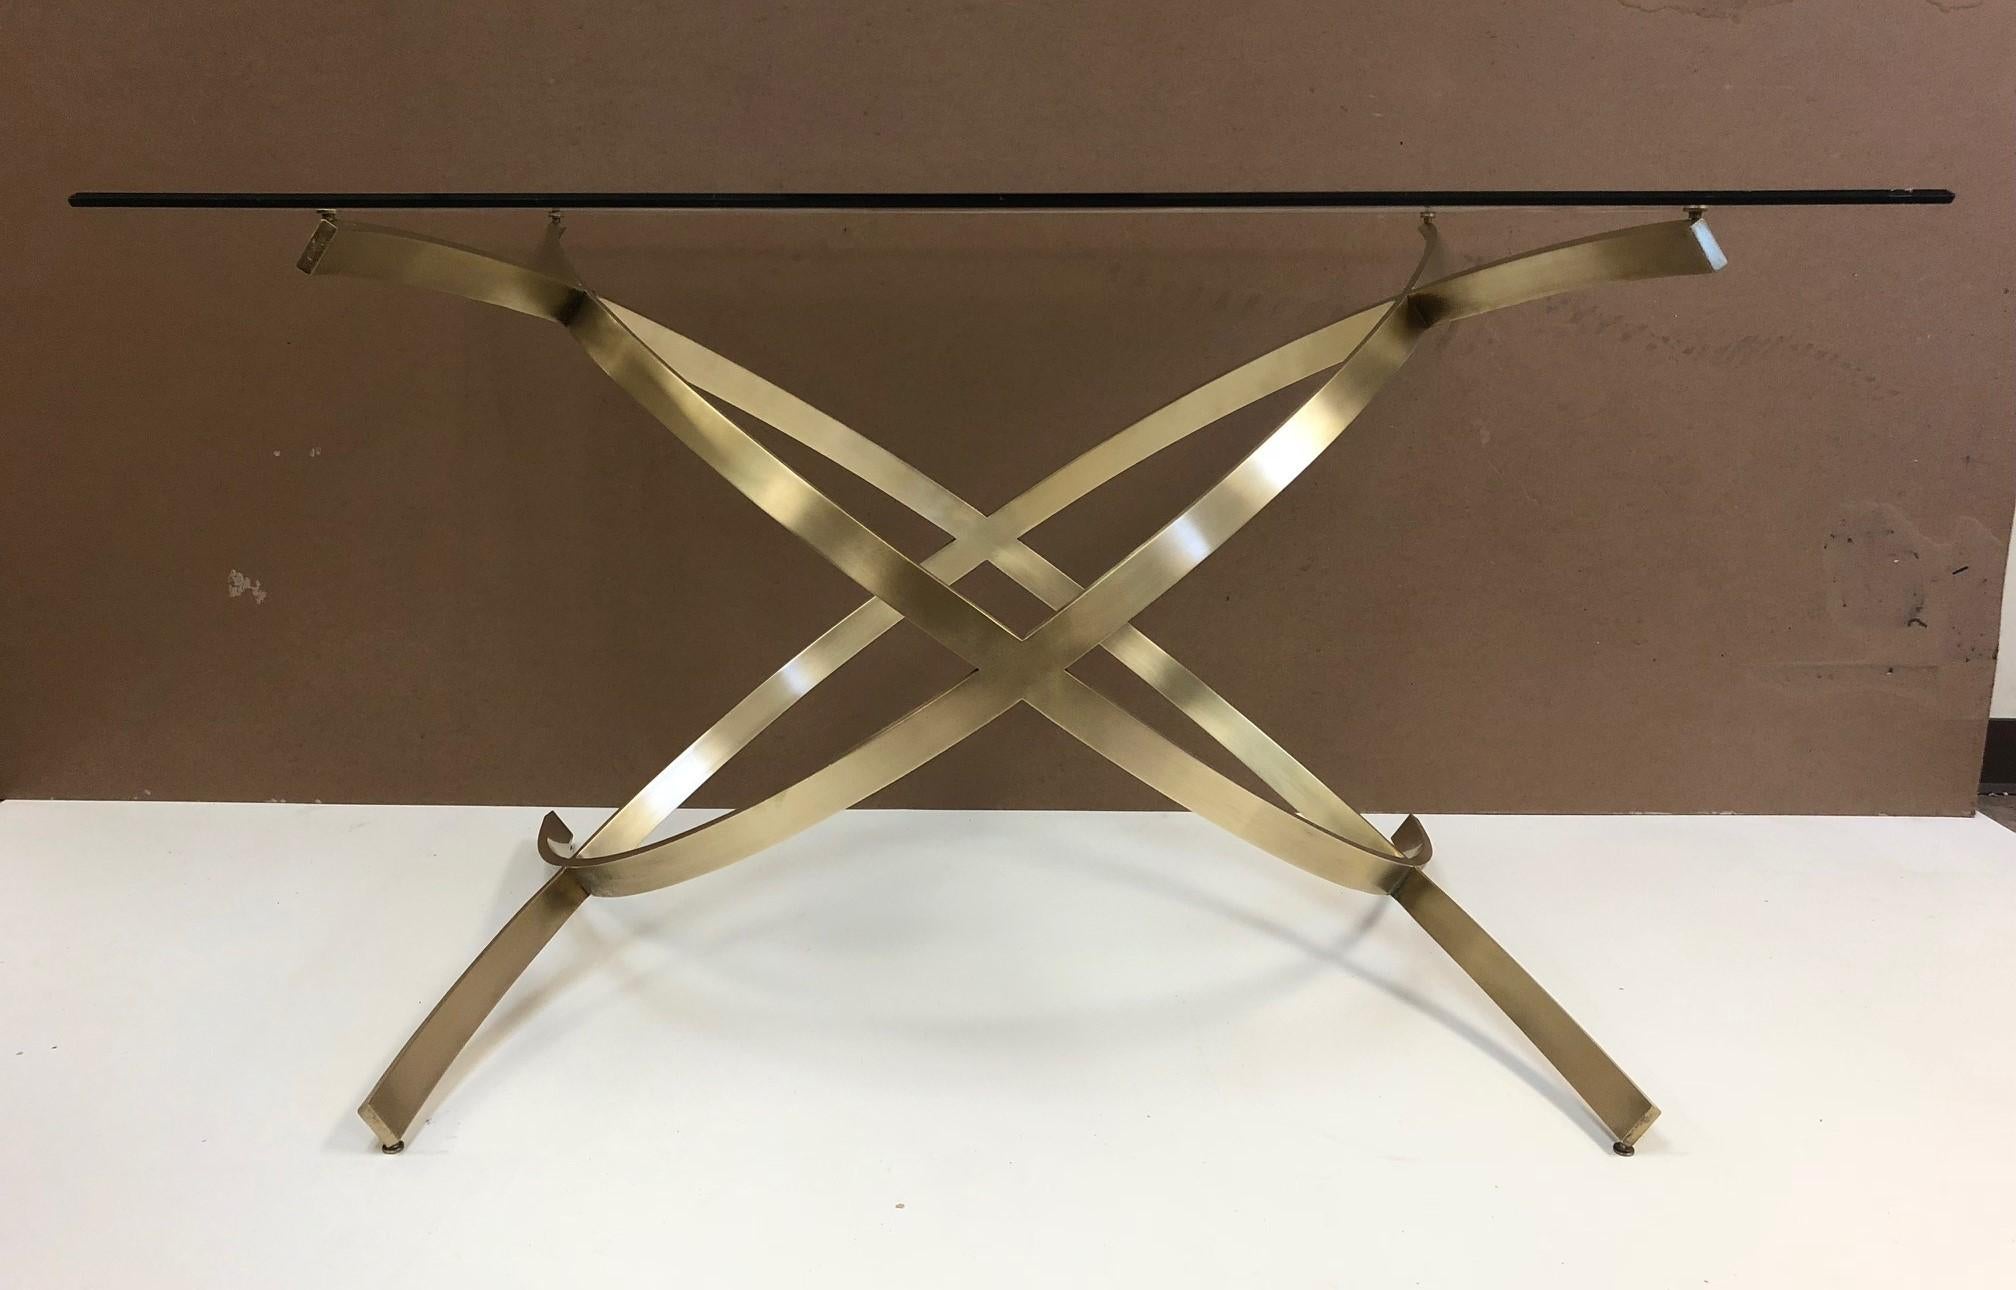 1950s Italian sculptural solid brass dining table with glass top.